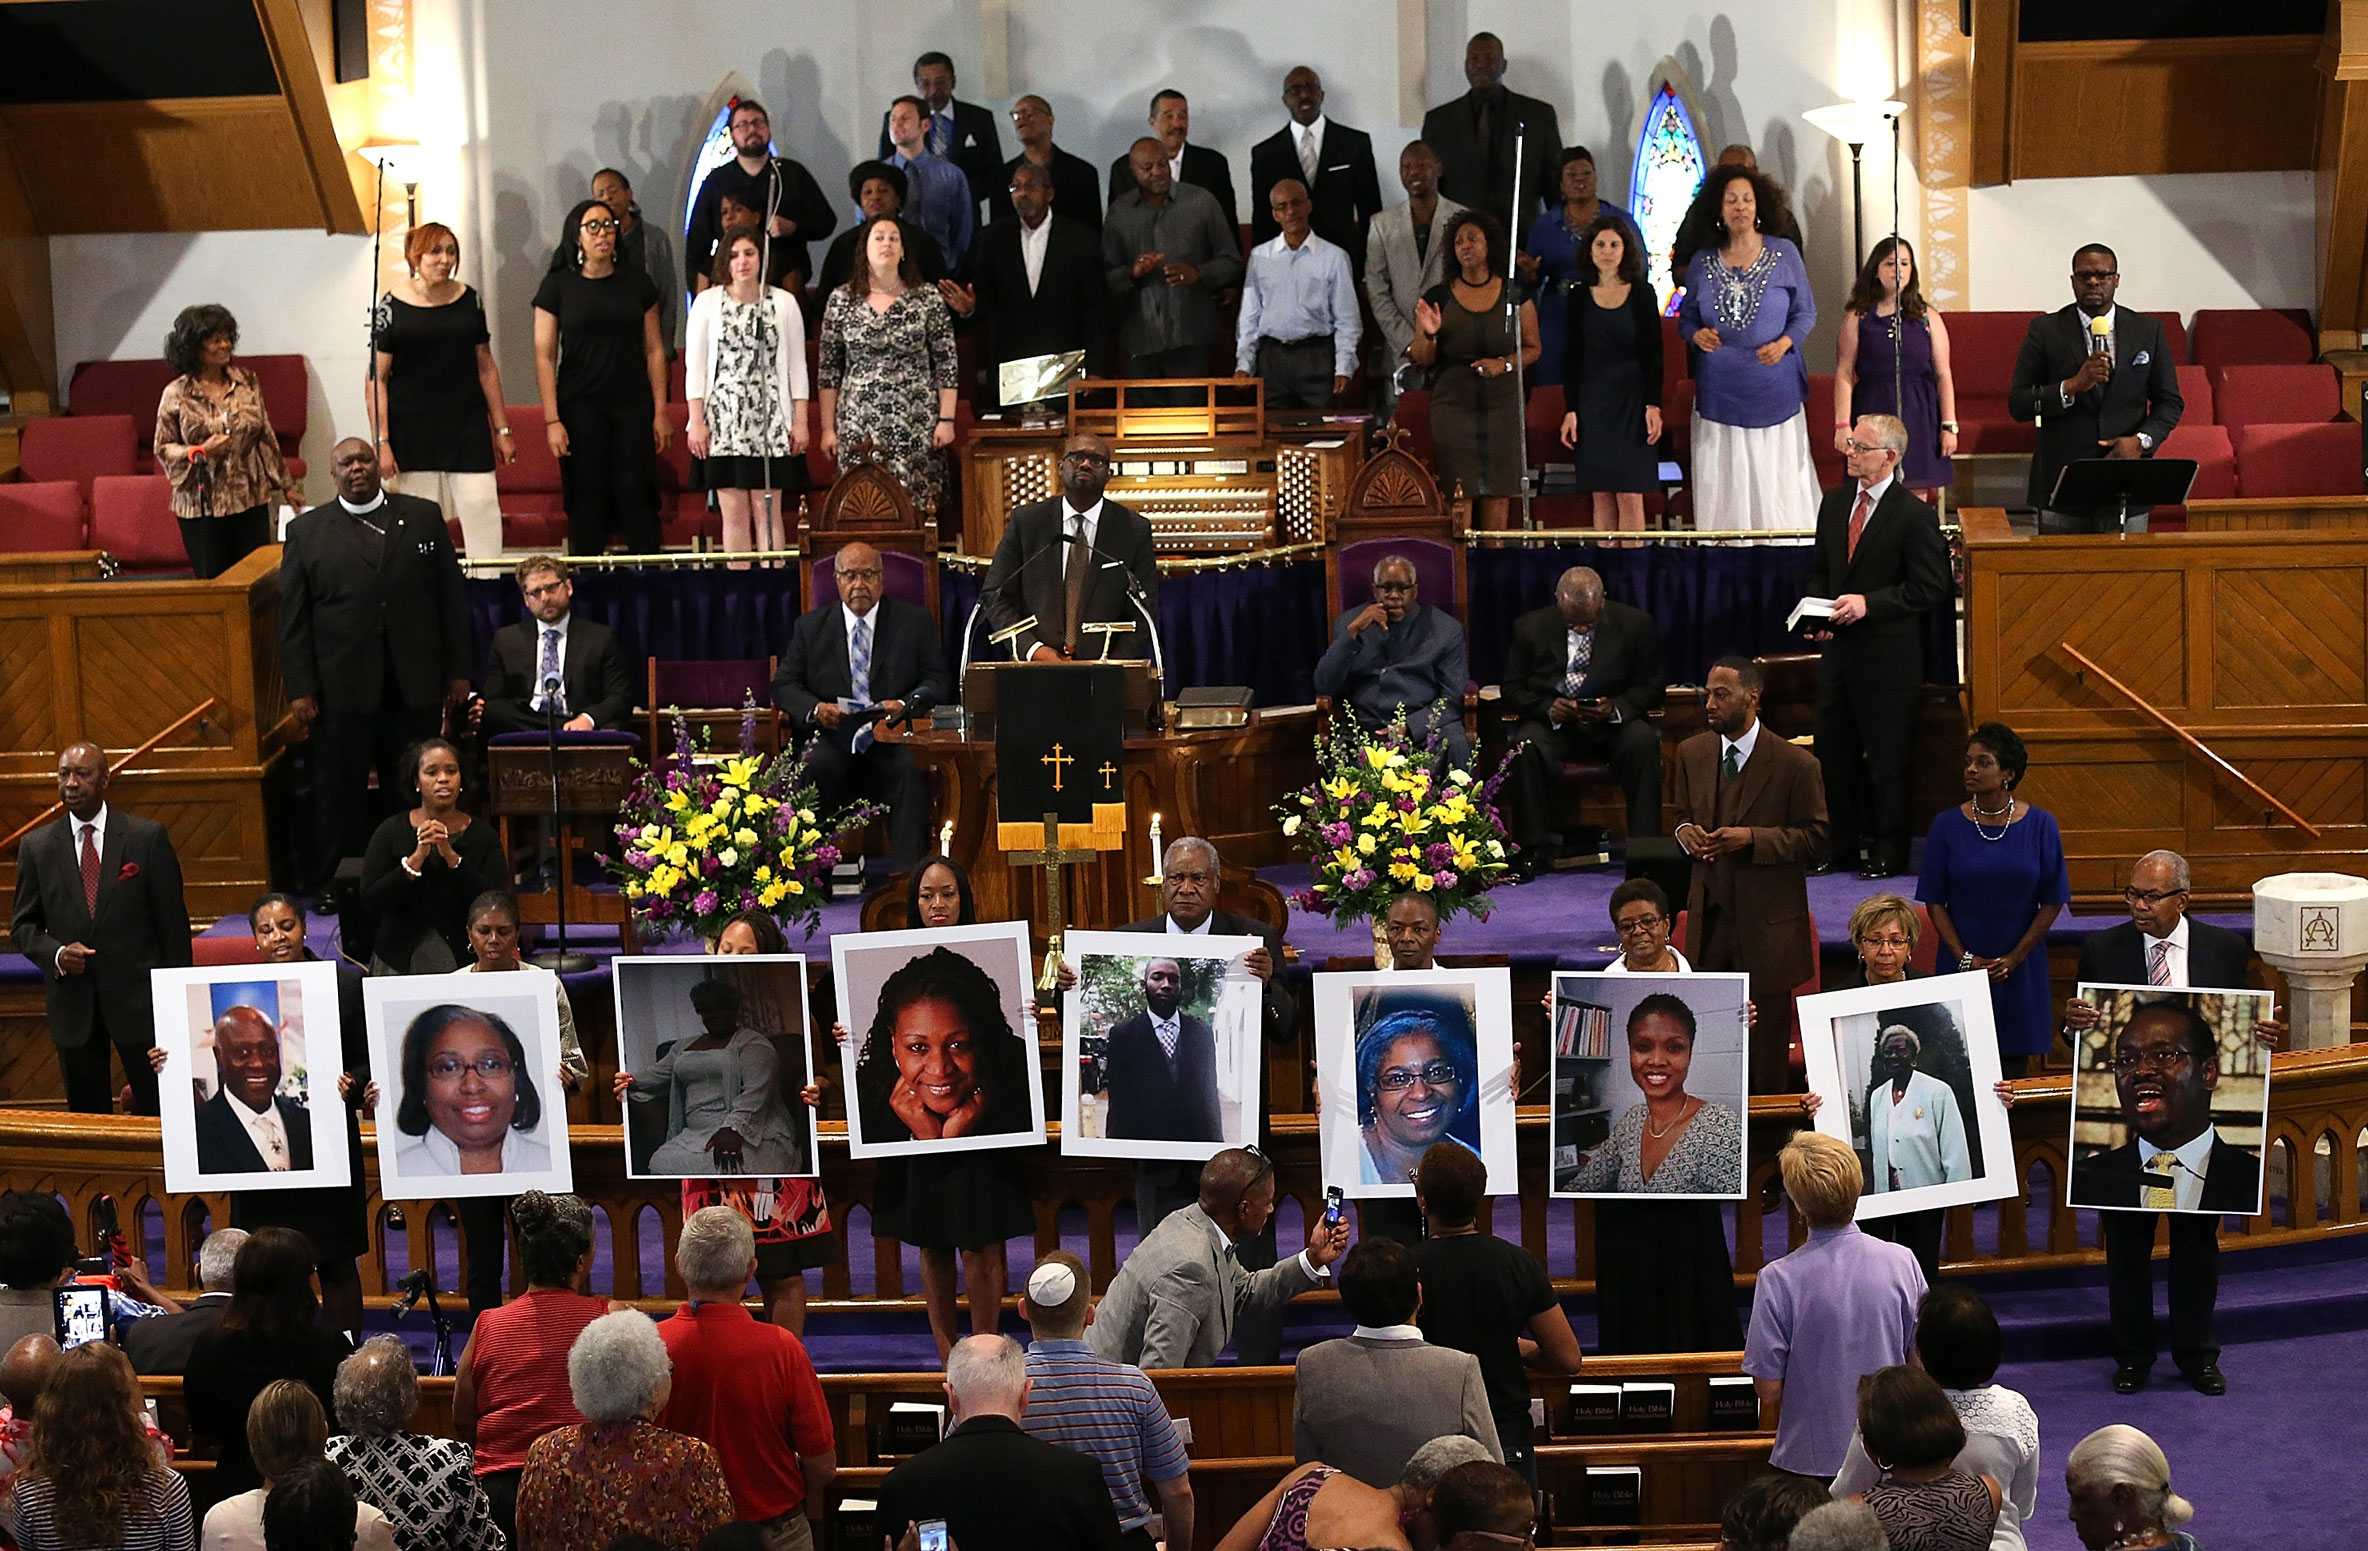 Mourners hold large photos of the victims as choir members and priest stand behind, singing and praying.